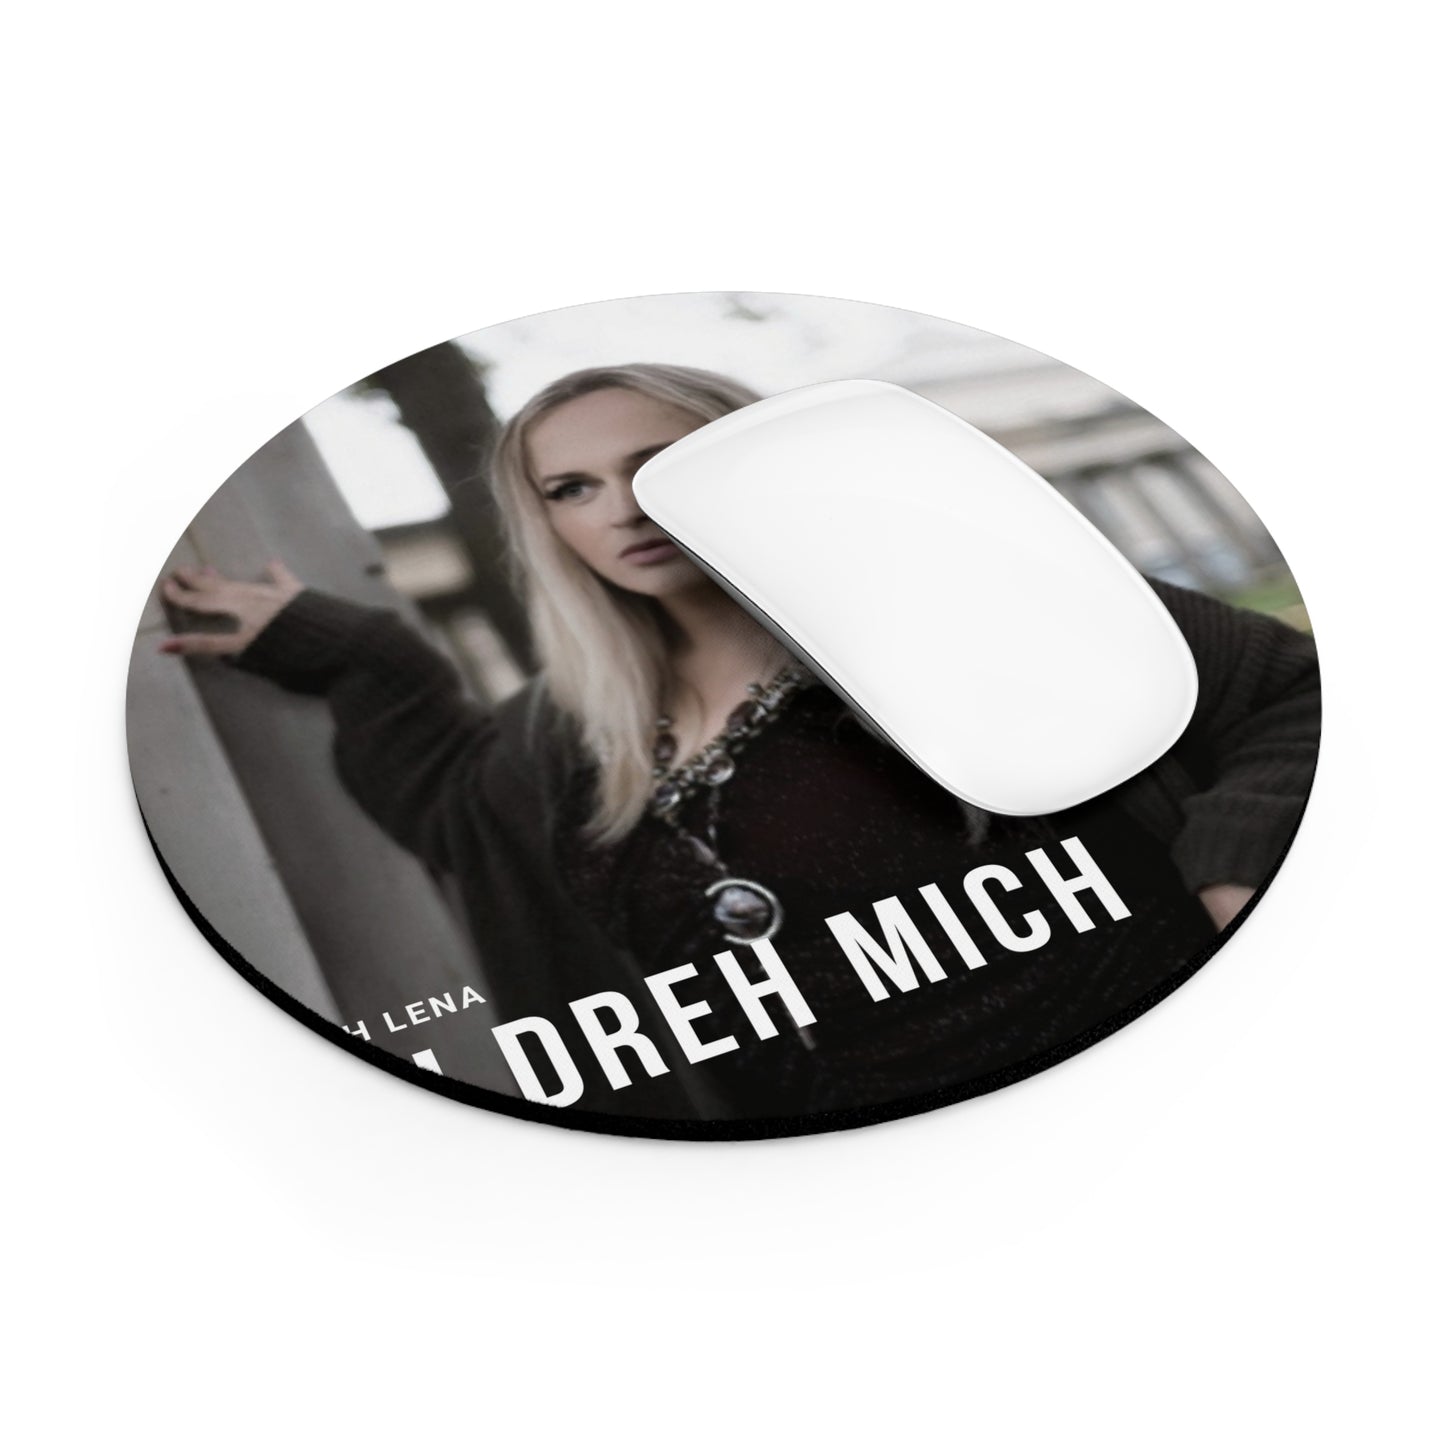 Mouse Pad (Ich Dreh mich)